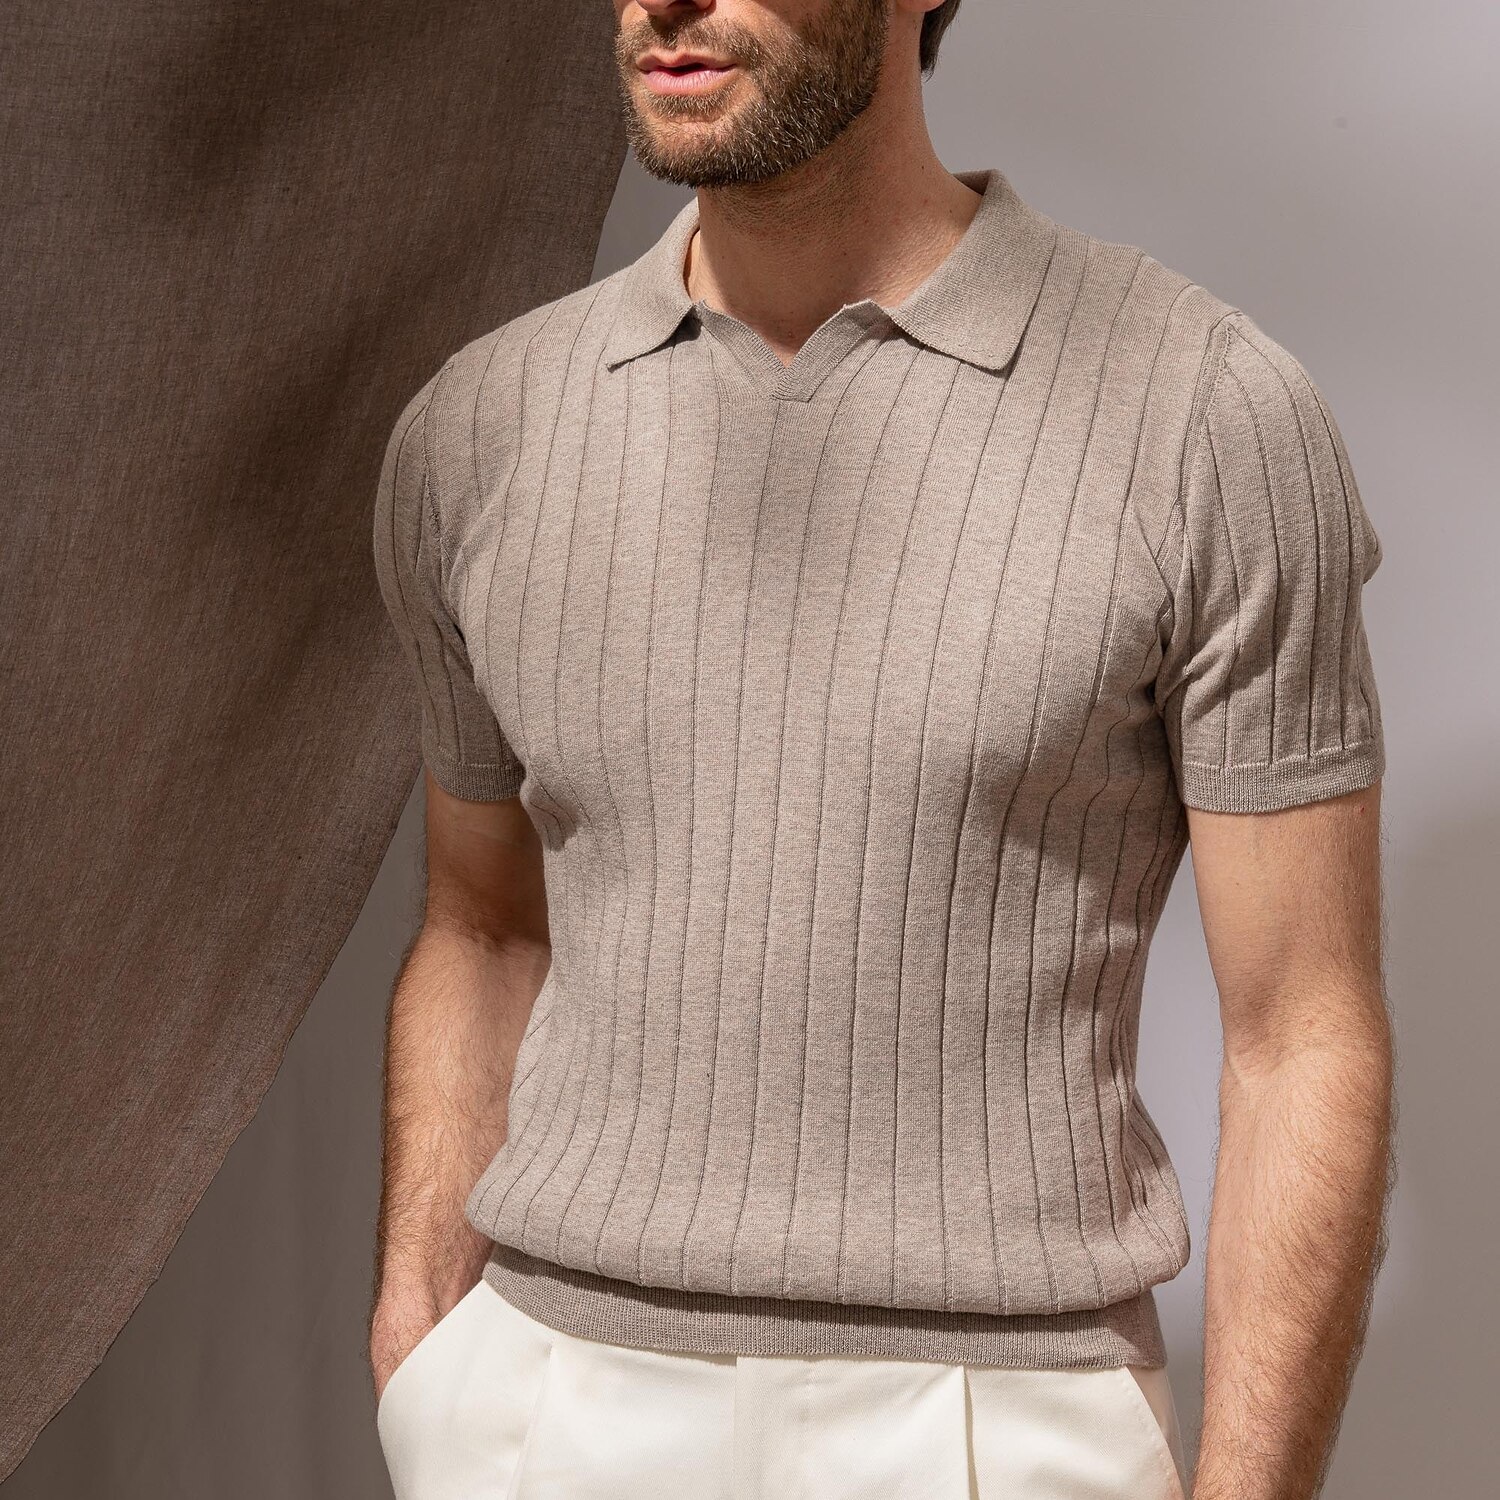 Men's Knit Polo Sweater Golf Shirt Business Casual Lapel V Neck Short Sleeves Basic Solid Color Plain Knitted Summer Maroon Beige Knit Polo Sweater